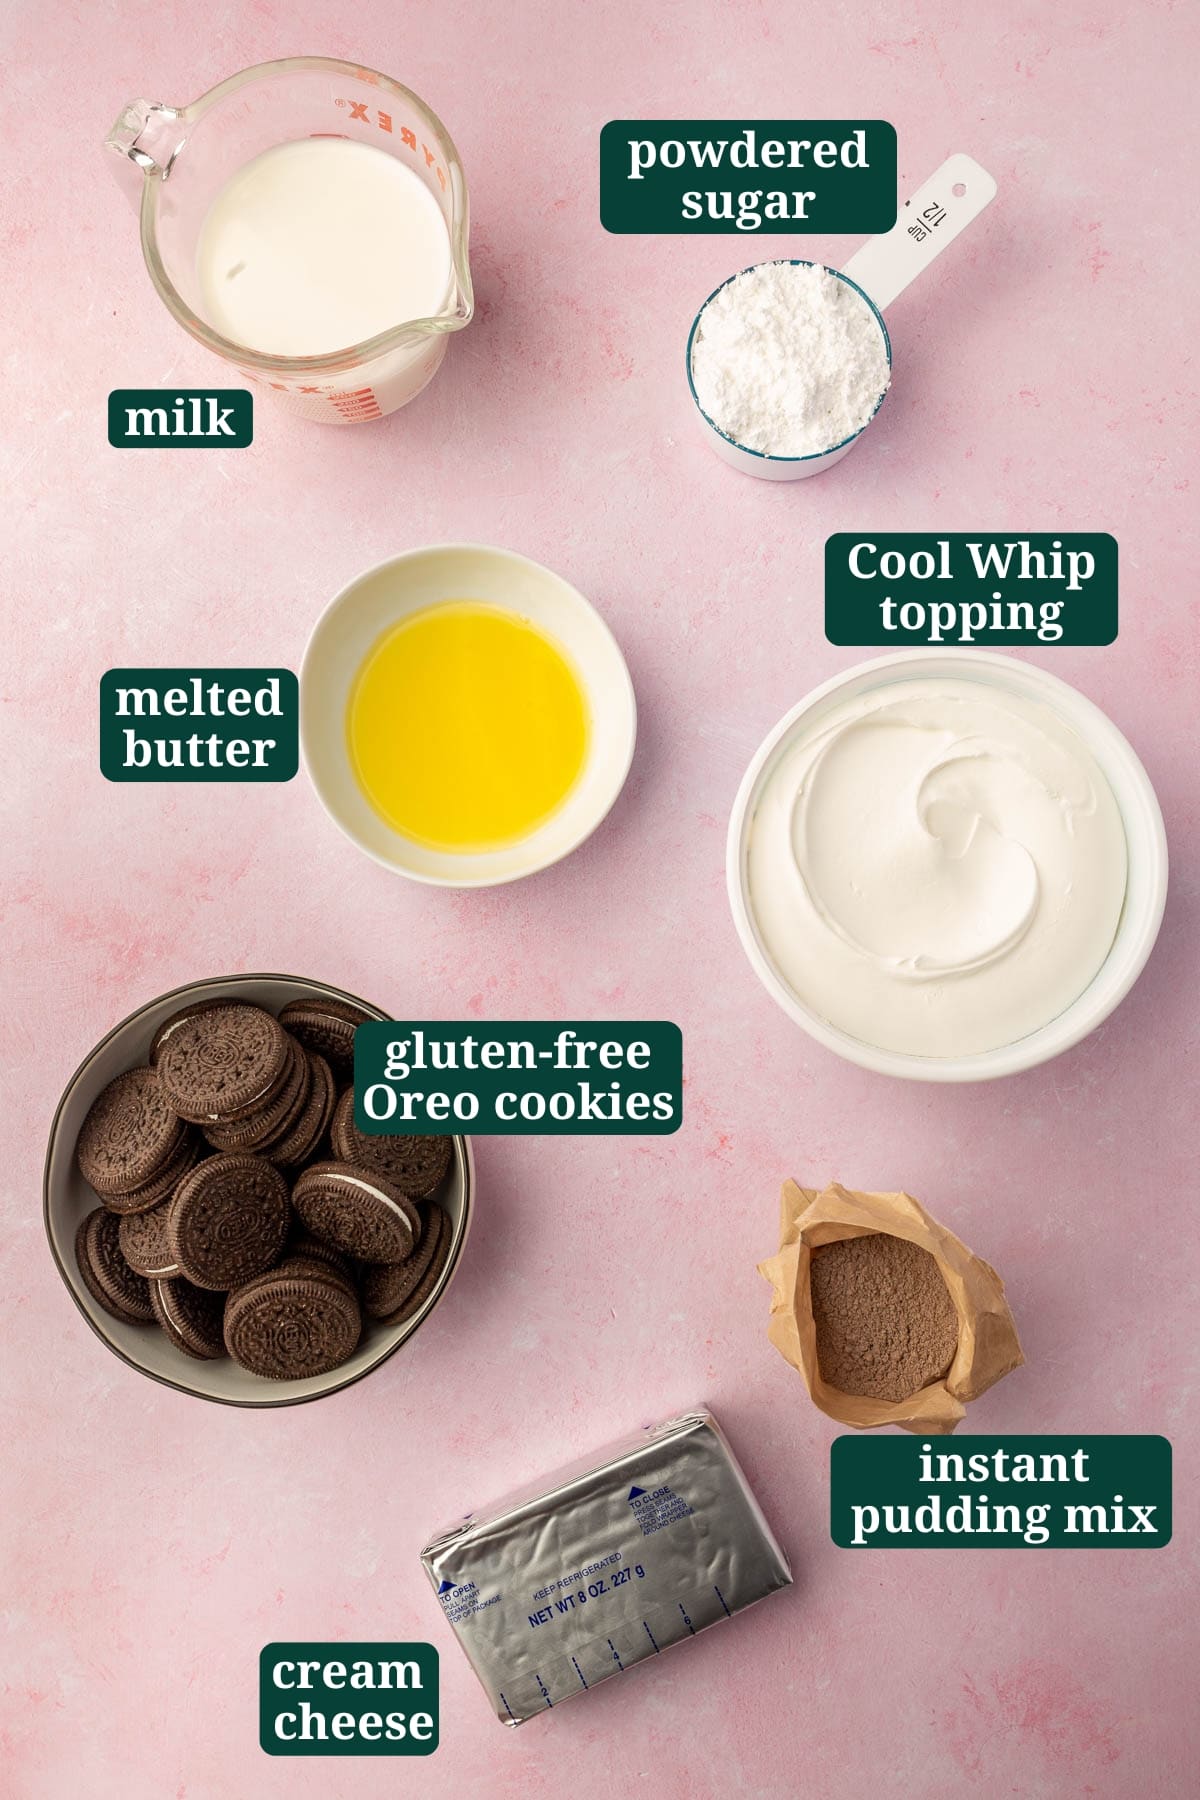 Ingredients in bowls to make gluten-free Oreo pudding pie, including milk, powdered sugar, melted butter, Cool Whip topping, gluten-free Oreo cookies, instant pudding mix, and cream cheese with text overlays over each ingredient.